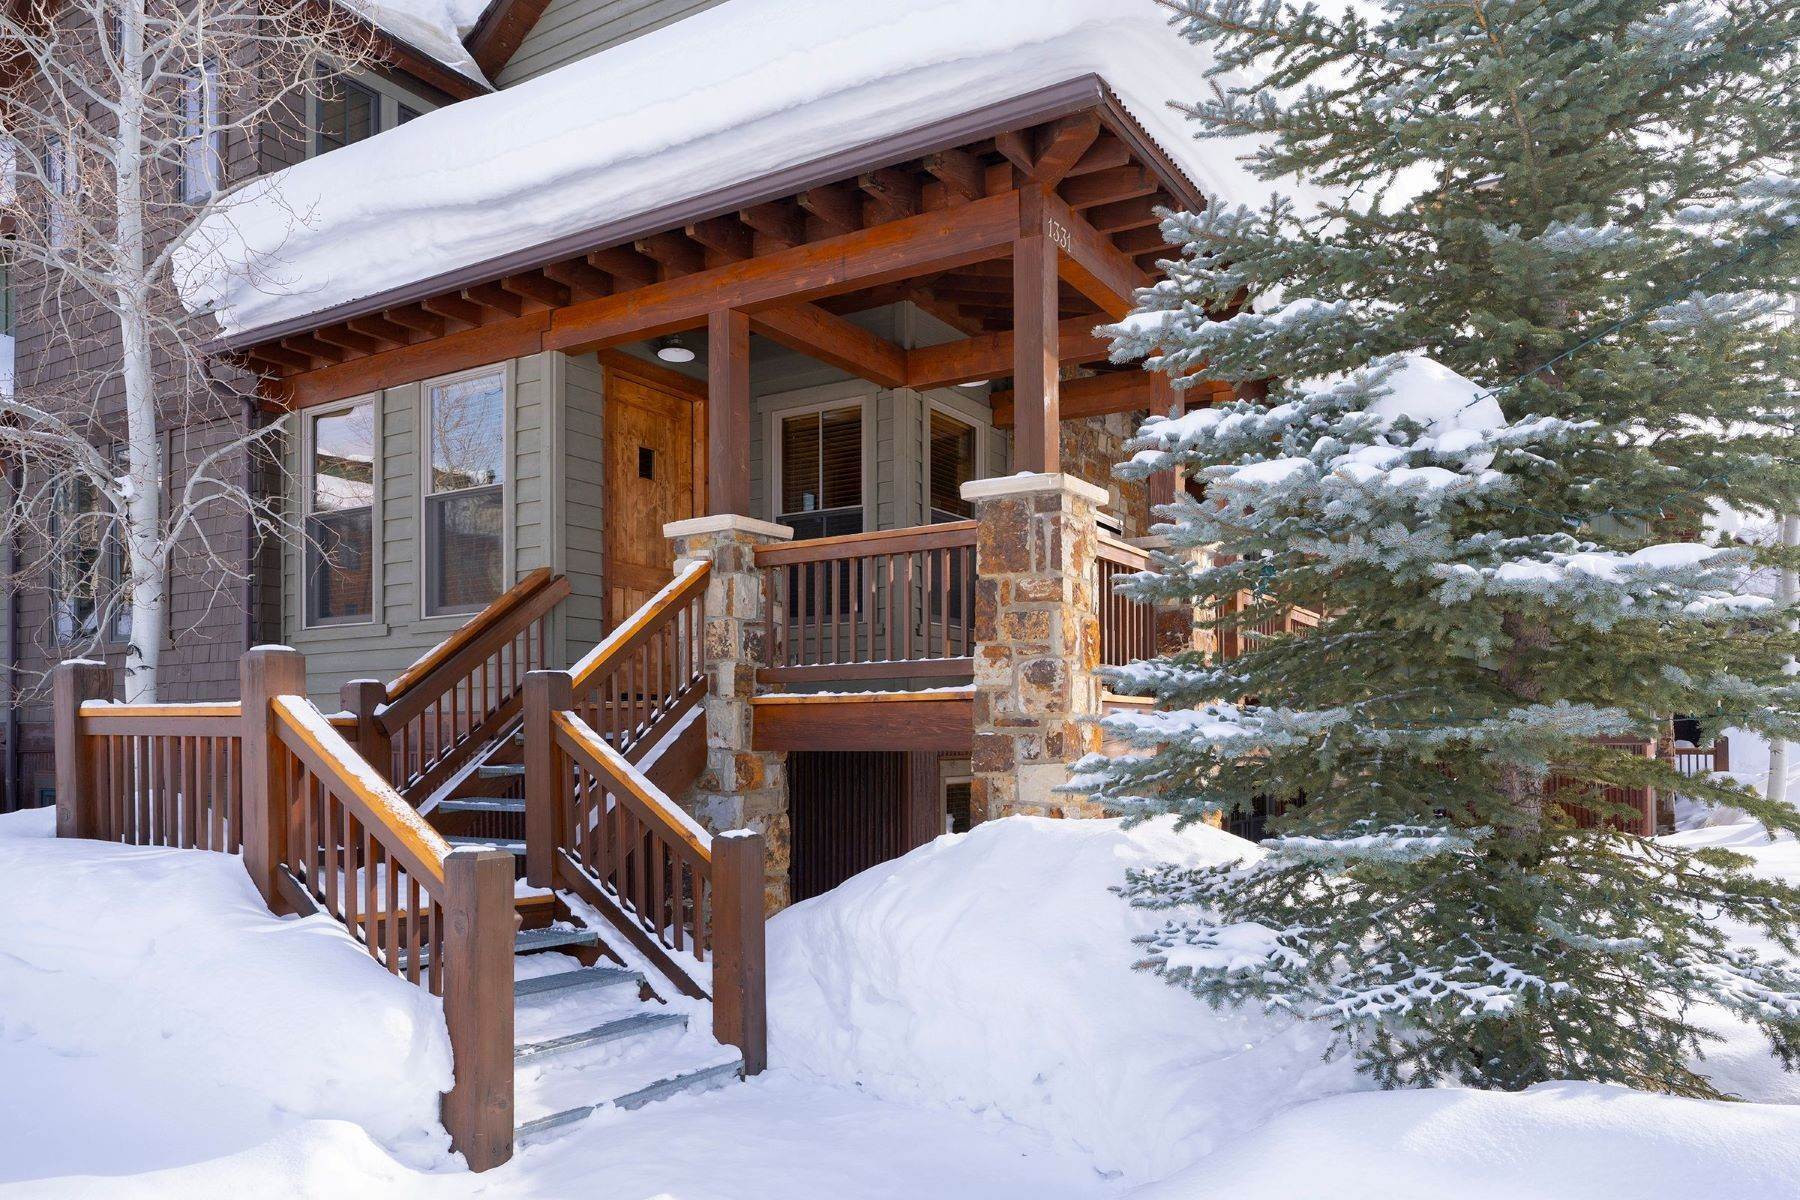 3. Fractional Ownership Property for Sale at 1331 Turning Leaf Court, Steamboat Springs, CO, 80487 1331 Turning Leaf Court Steamboat Springs, Colorado 80487 United States